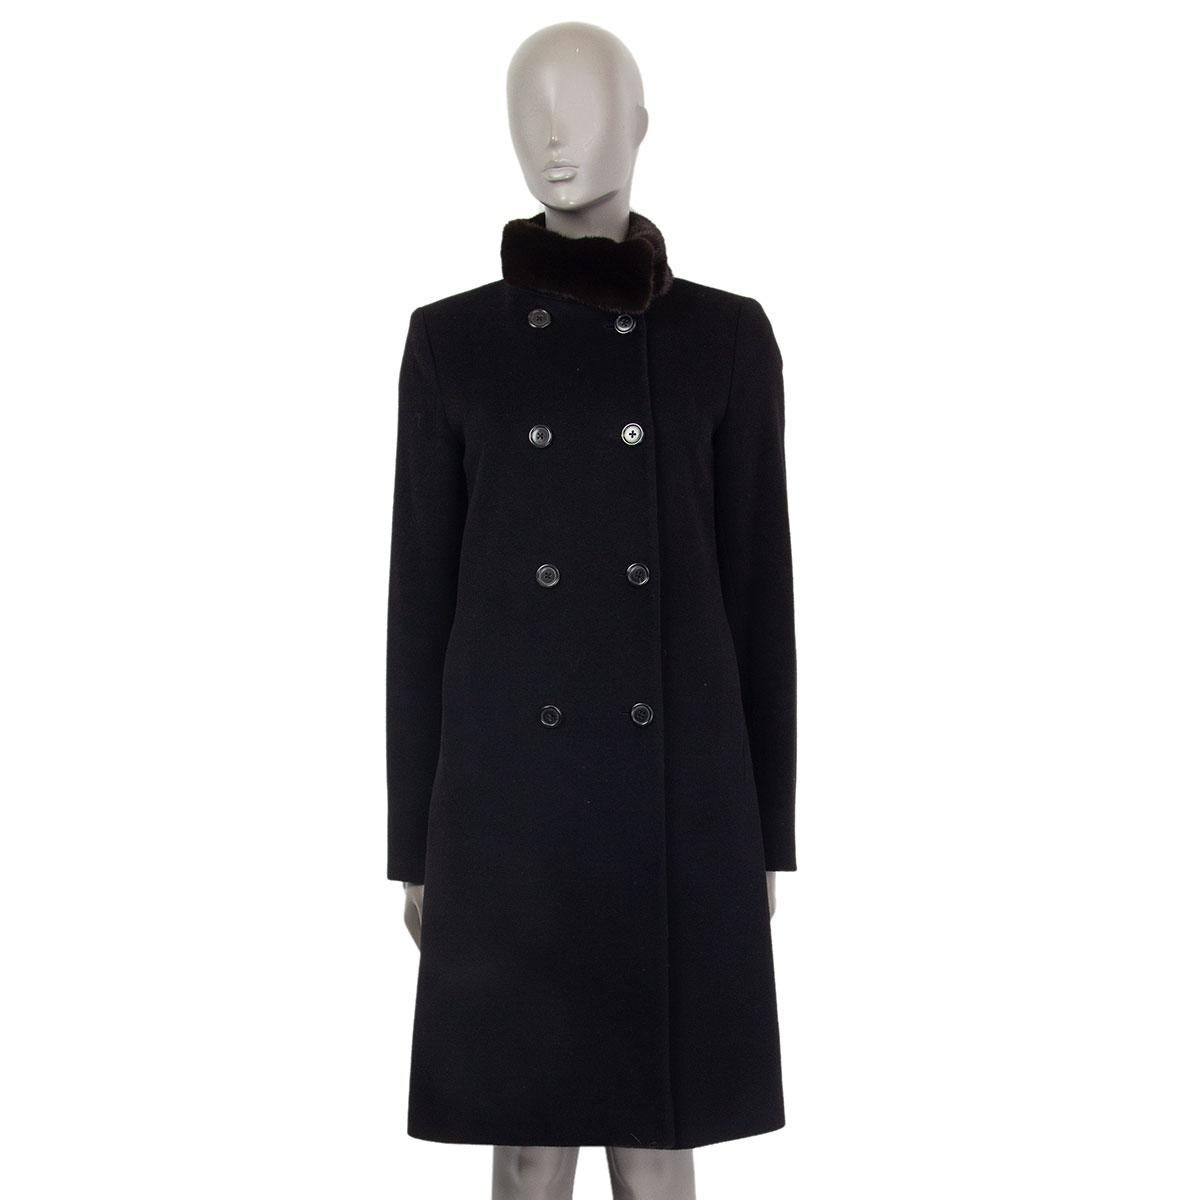 Jil Sander double breasted bend collar coat in black cashmere (100%) and brown natural mink fur (100%) detail on the neck. Closes with buttons on the front and has slit pockets. Lined in black silk (100%). Has been worn and is in excellent